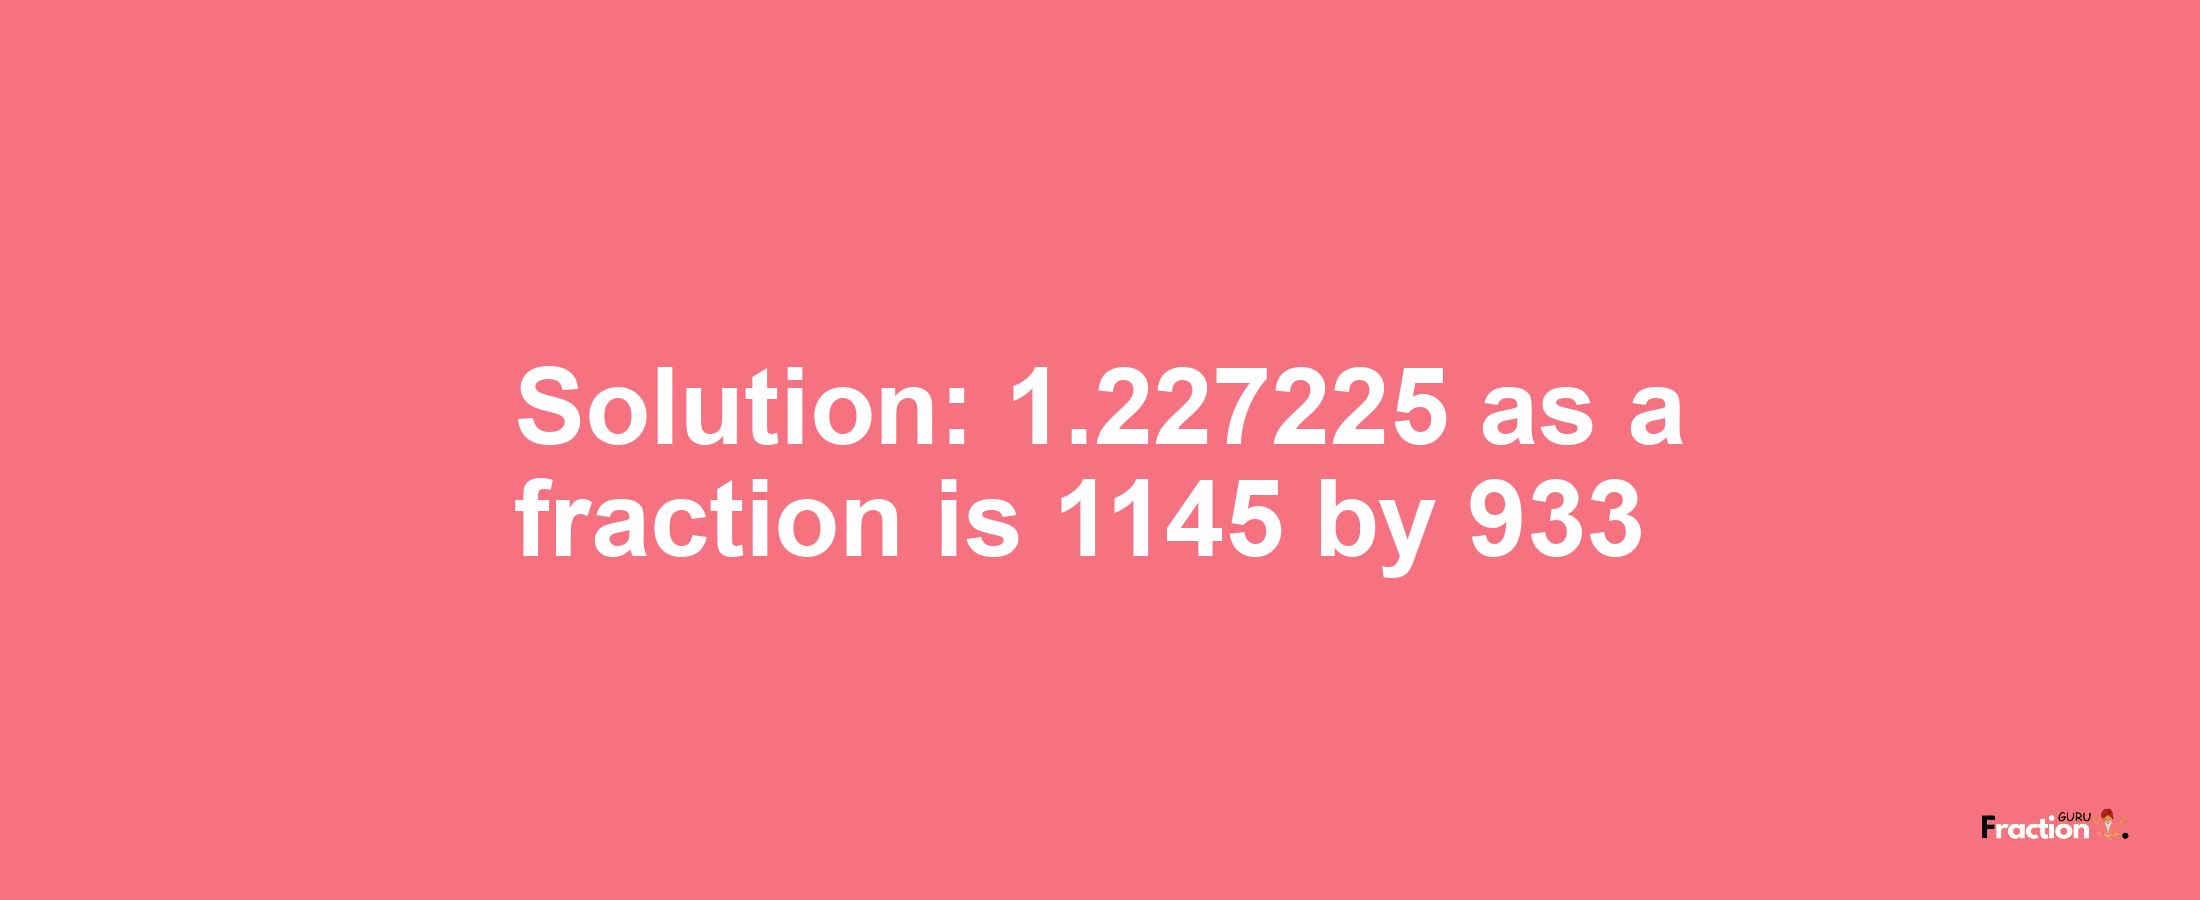 Solution:1.227225 as a fraction is 1145/933